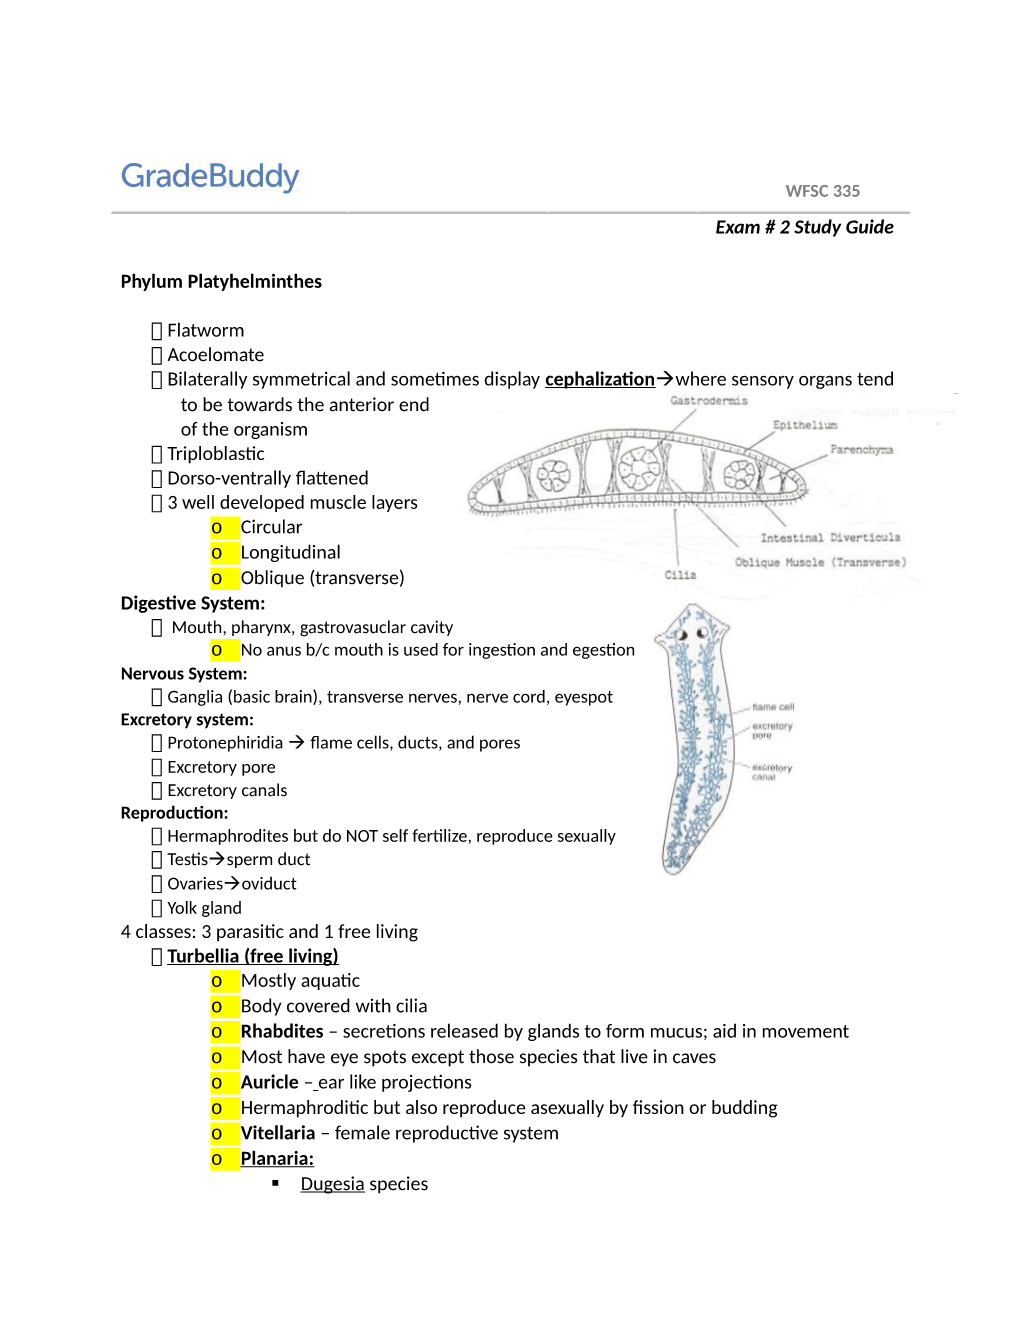 Exam # 2 Study Guide Phylum Platyhelminthes Flatworm